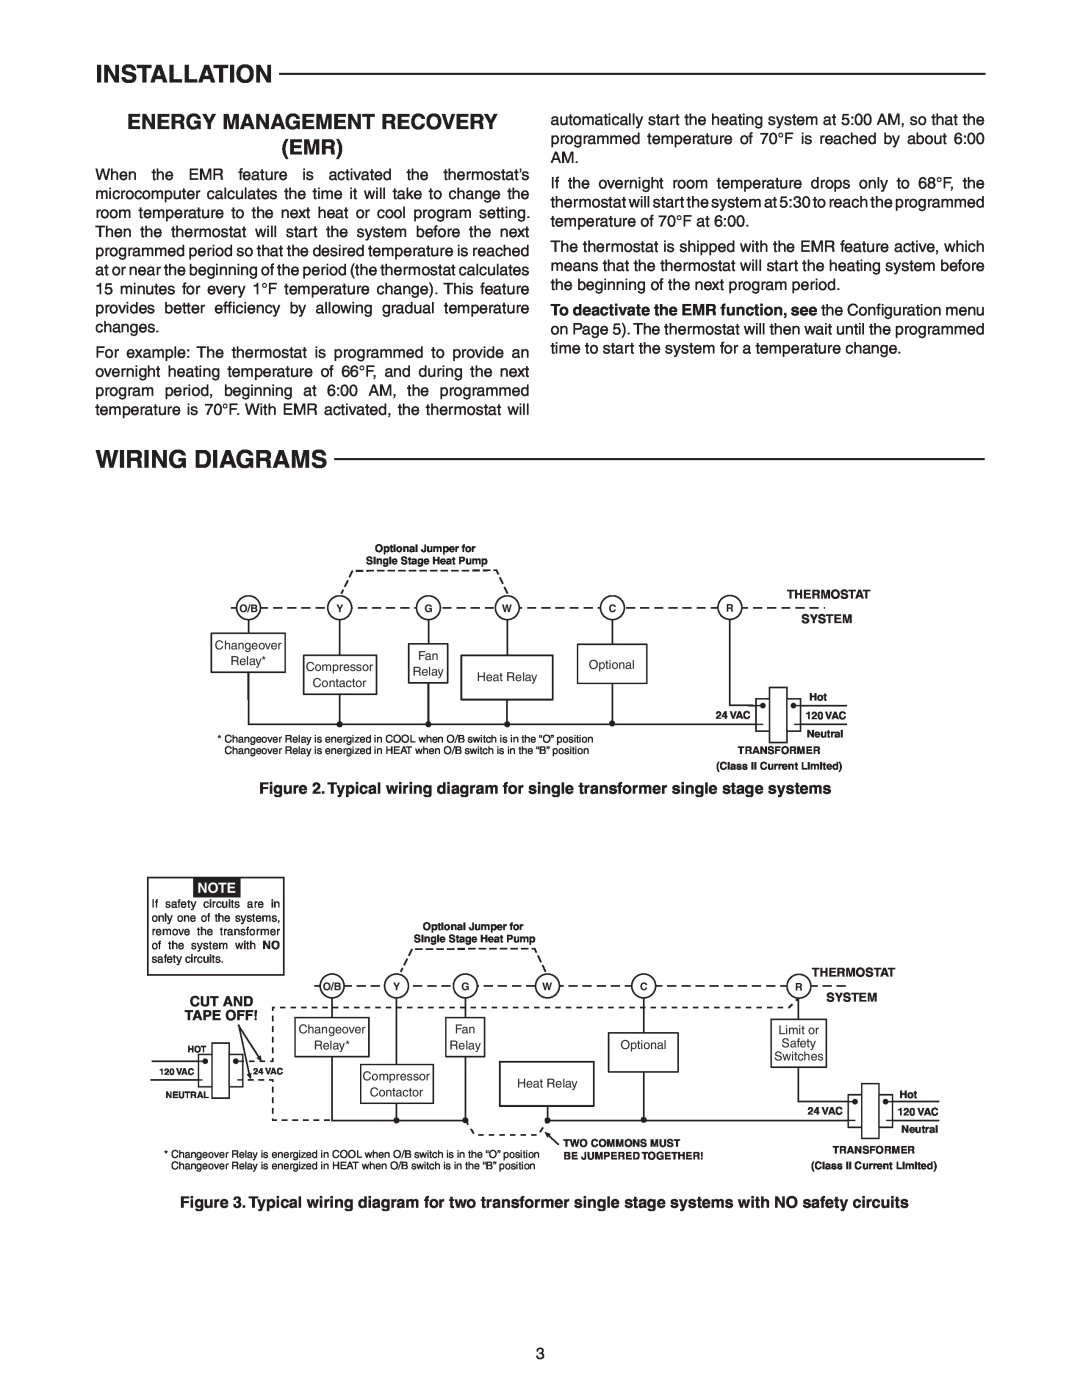 White Rodgers 1F80-0224 specifications Wiring Diagrams, Energy Management Recovery Emr, Installation, Cut And, Tape Off 